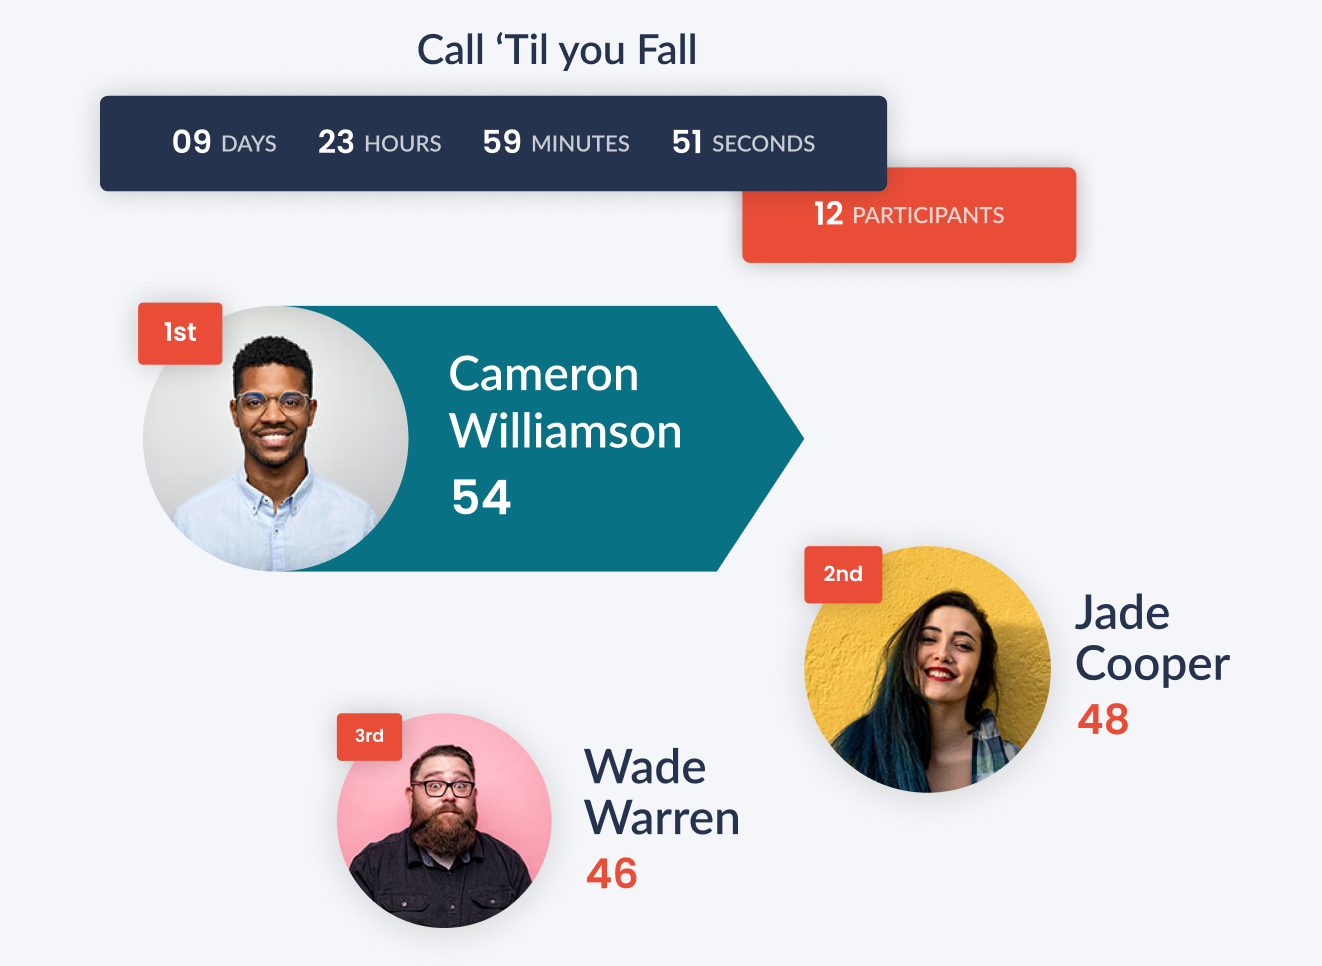 How Sales Leaderboards Help Your Team Perform Even Better